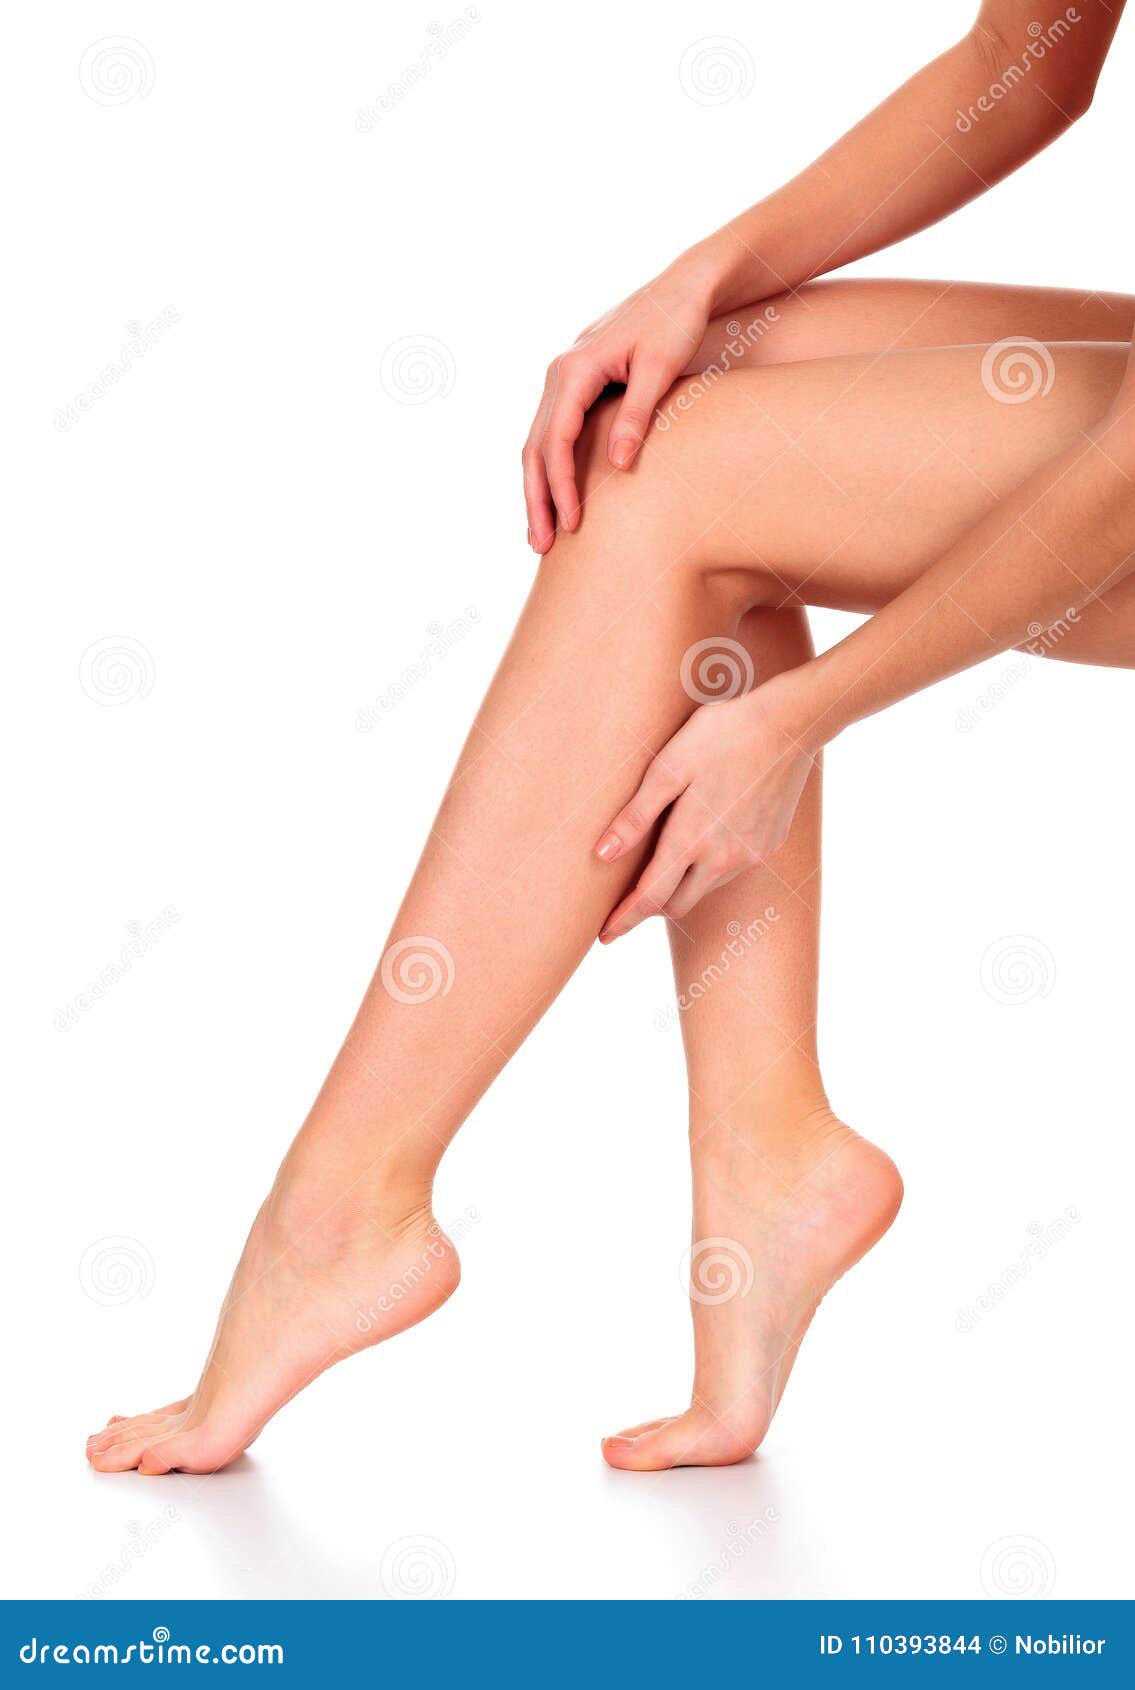 Body Care. Beautiful Woman with Long Legs, Healthy Soft Skin Stock